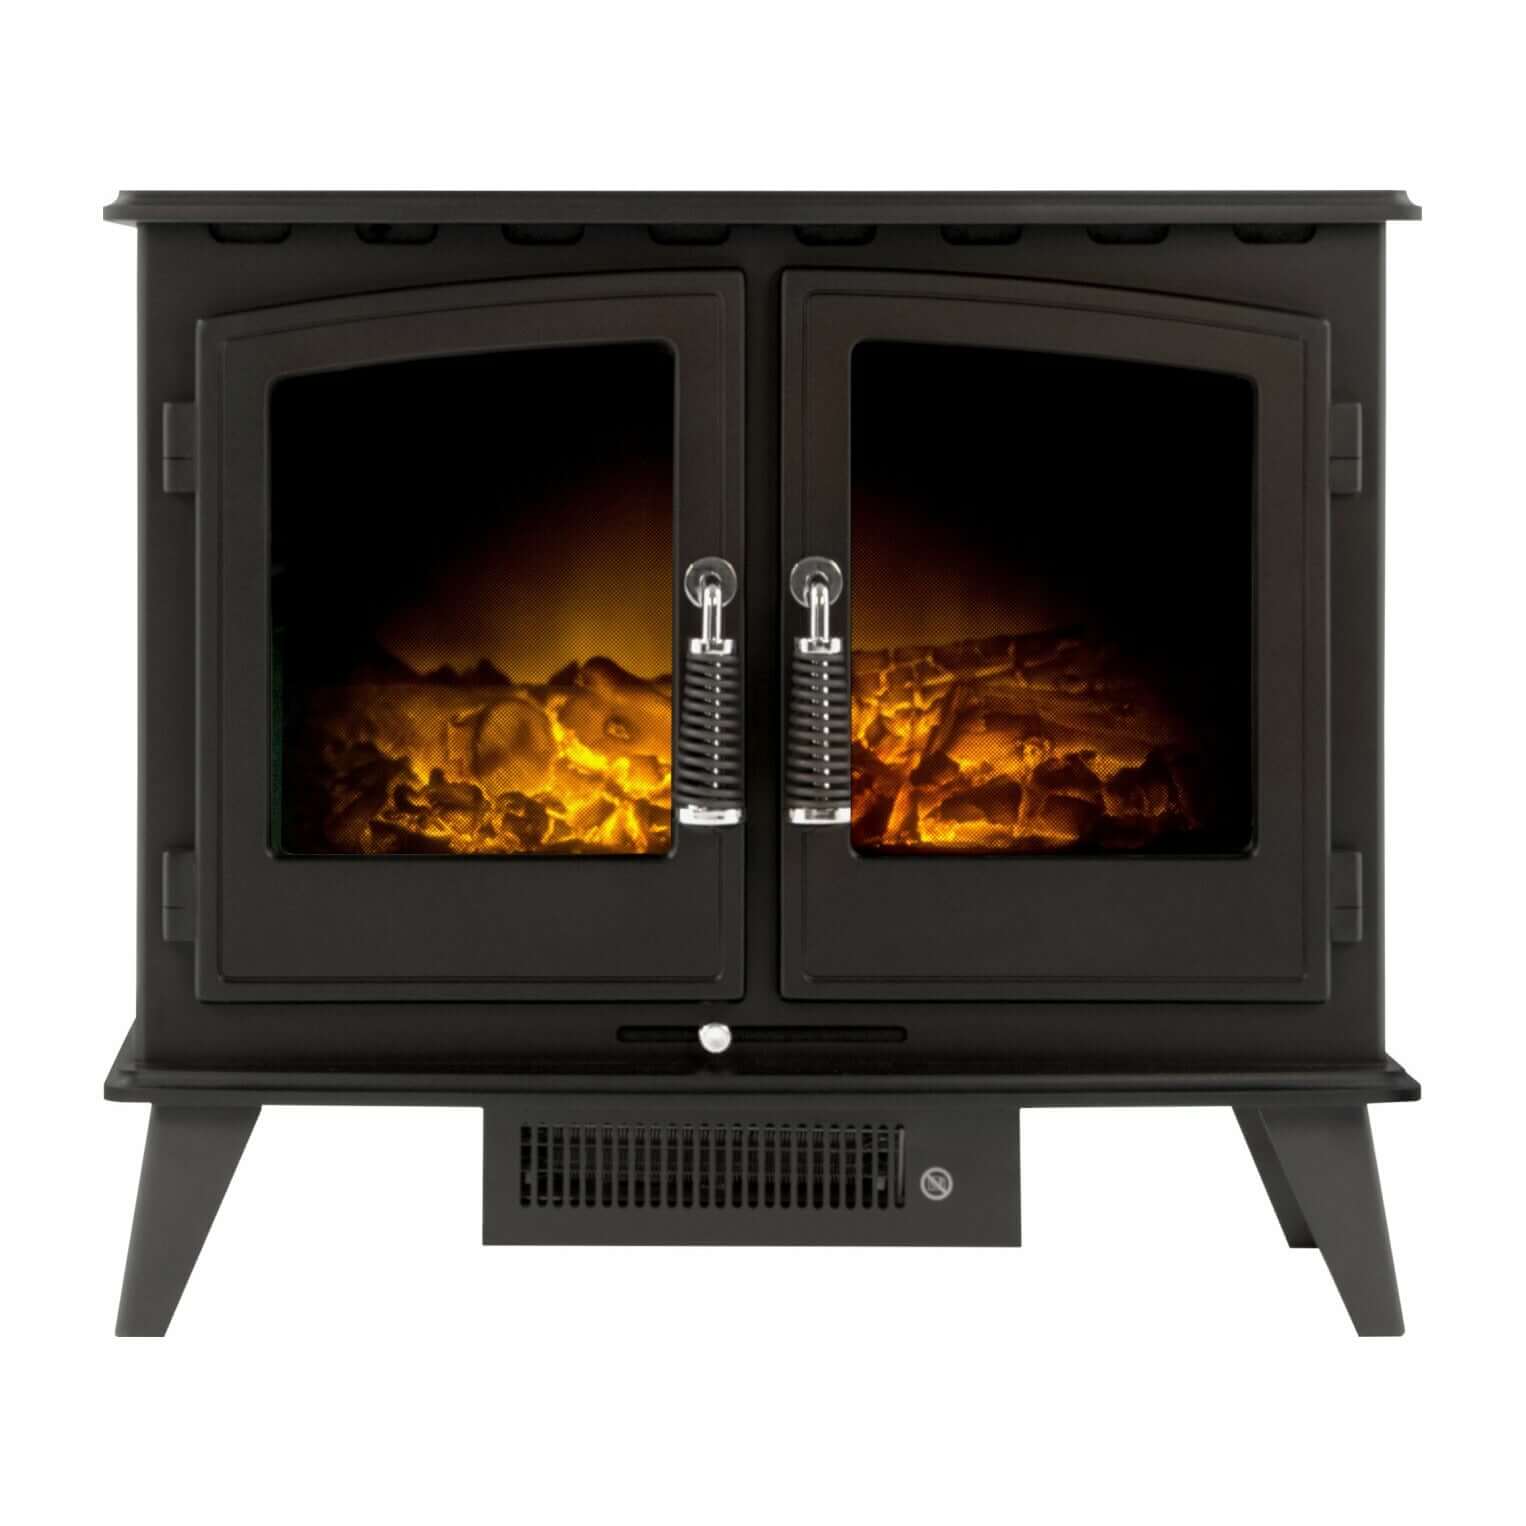 Adam Woodhouse Electric Stove in Black - Glowing Flame